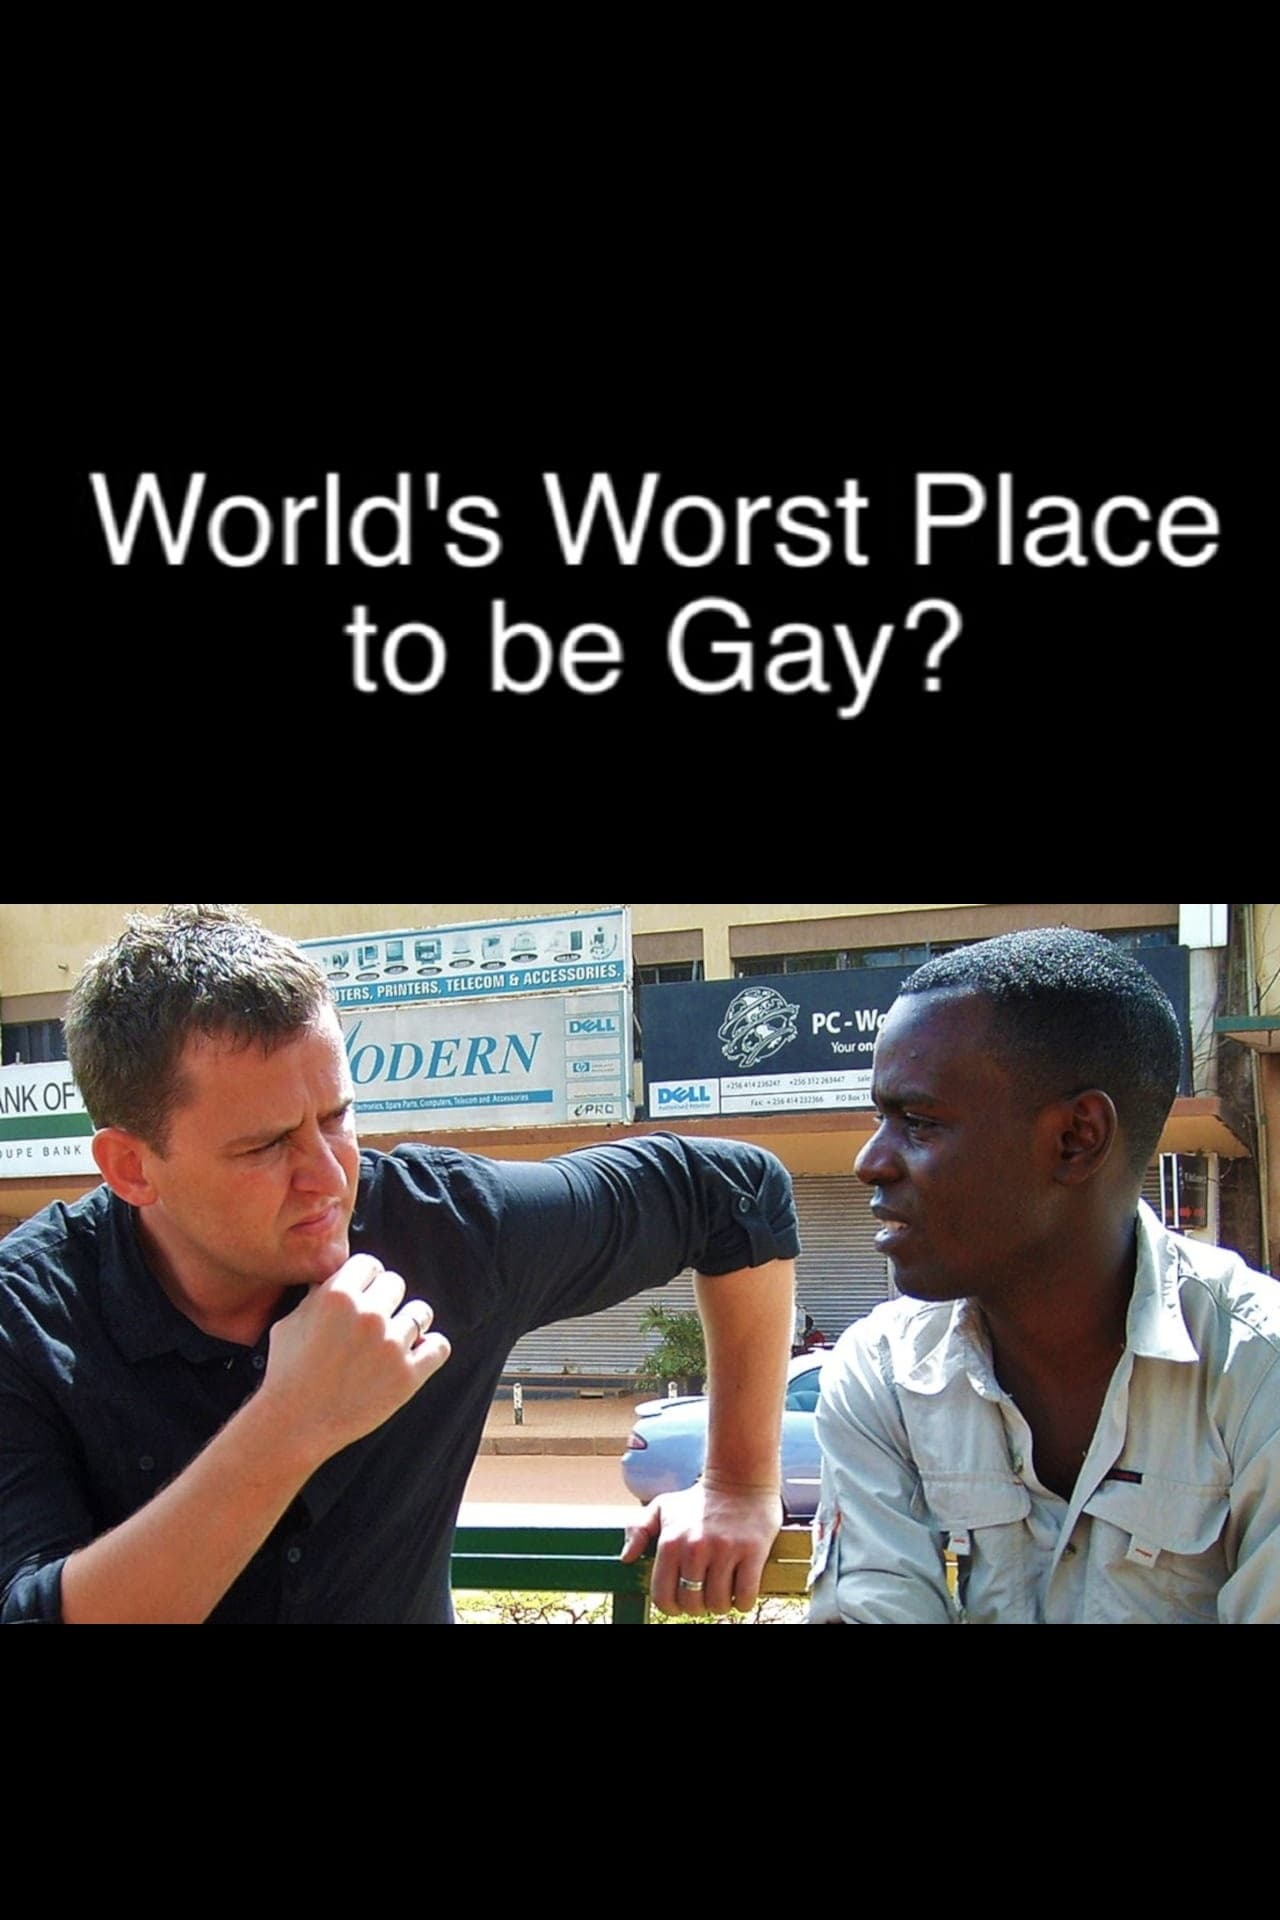 The World's Worst Place to Be Gay?